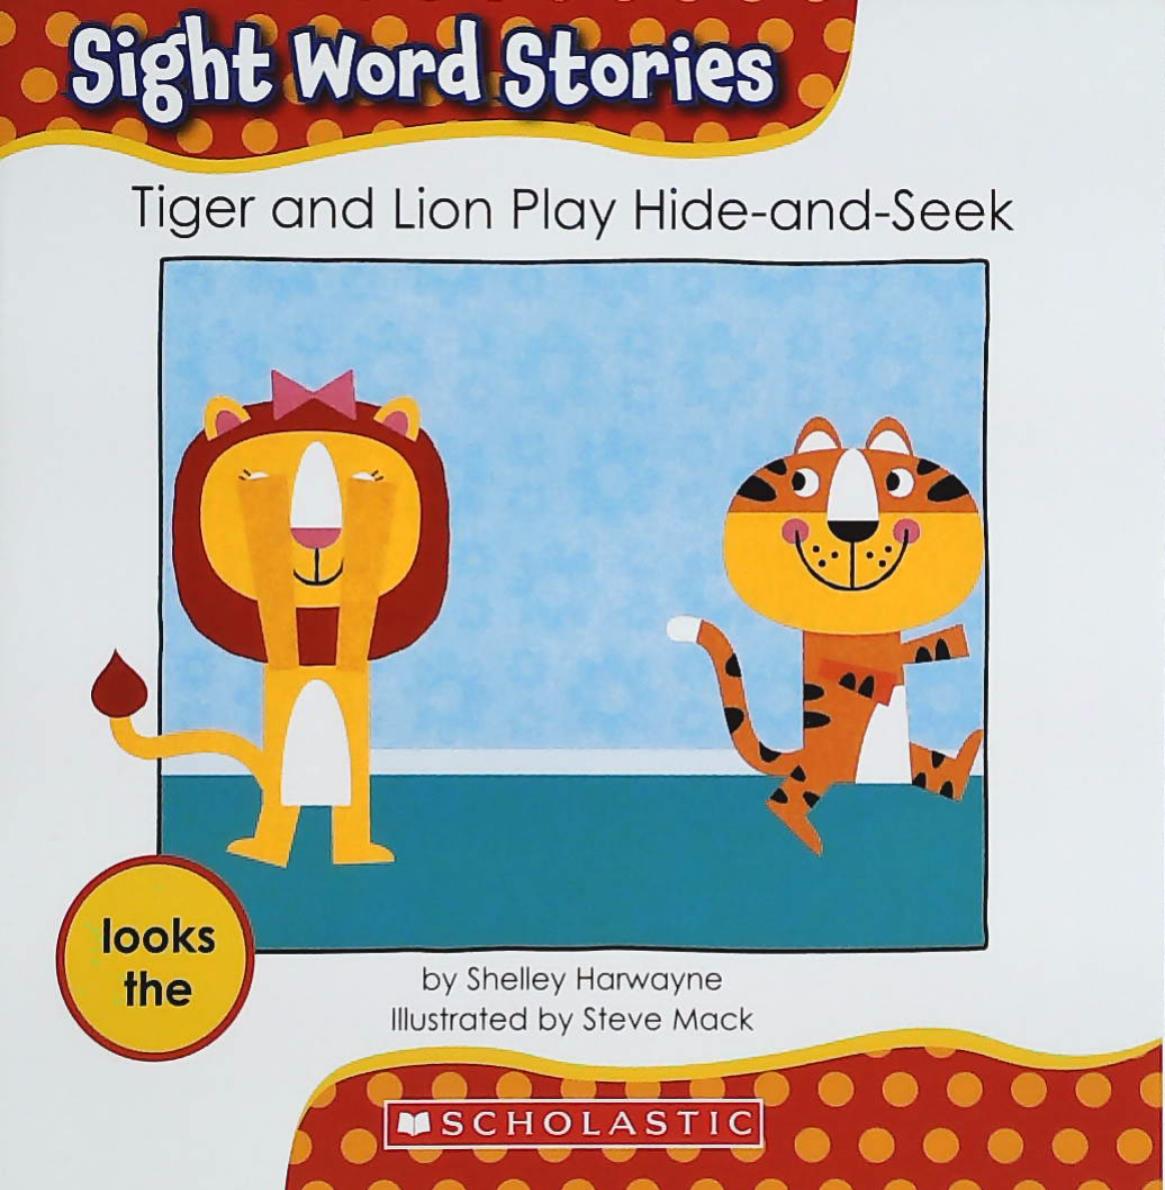 Livre ISBN 0545167779 Sight Word Stories : Tiger and Lion Play Hide-and-Seek (Shelley Harwayne)